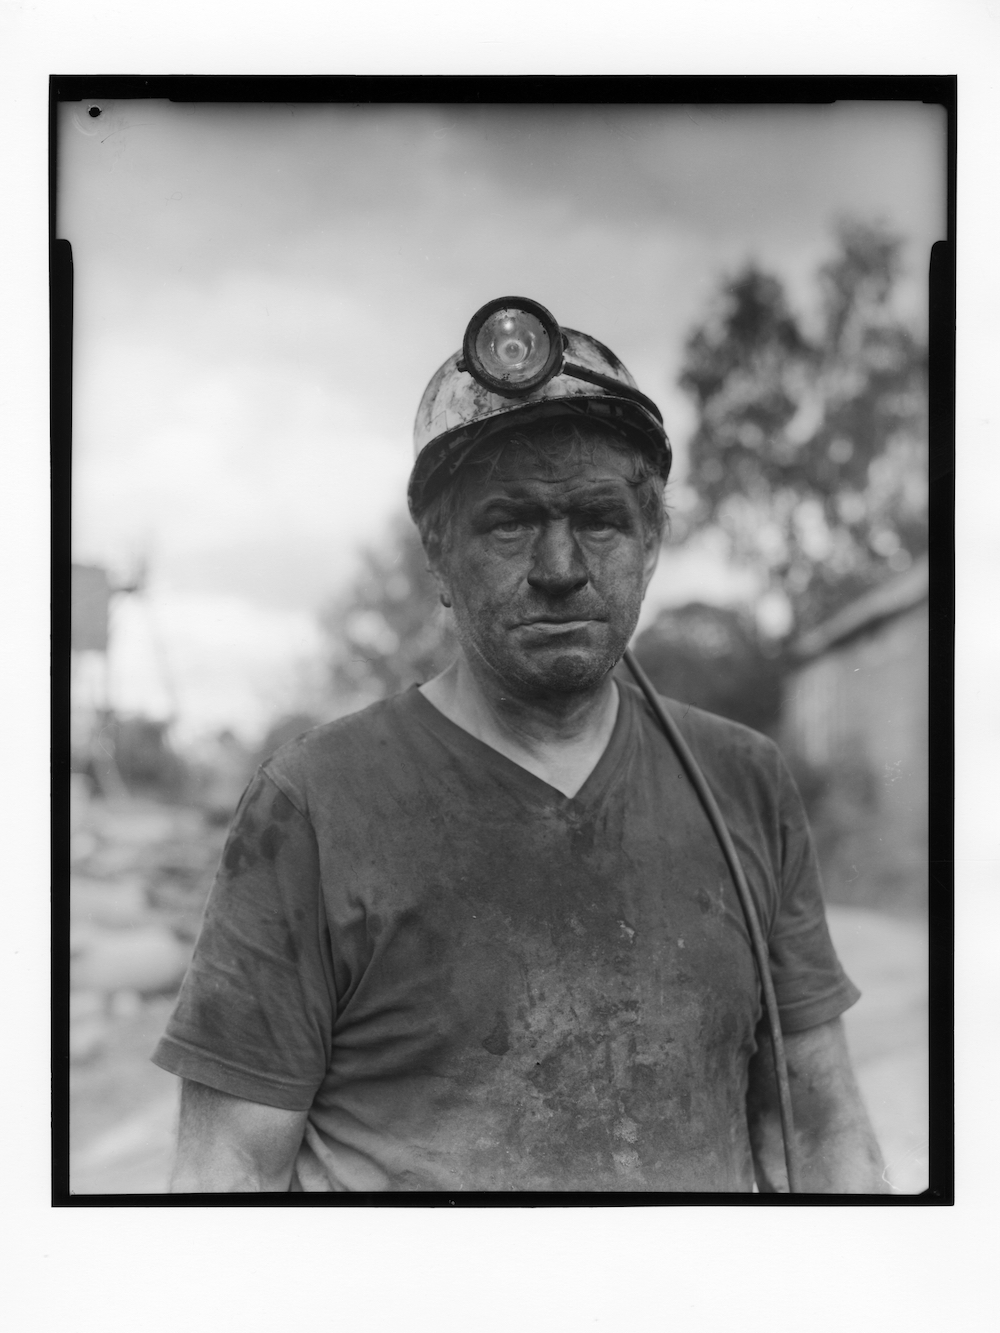 Babe, one of the last Yorkshire miners, 2010. Ian Beesley explains, 'I spent years photographing Hayroyd’s Pit in Clayton West, Yorkshire. Babe was a face worker. He asked me to take a formal portrait with my plate camera after he had finished his shift and was still covered in pit dirt. He wanted the photograph for his grandchildren and their children. 'We are the last of the miners and soon we will all be gone, I want my grandkids, their kids and their grandkids to know I was a miner and this is what I looked like.' © Ian Beesley